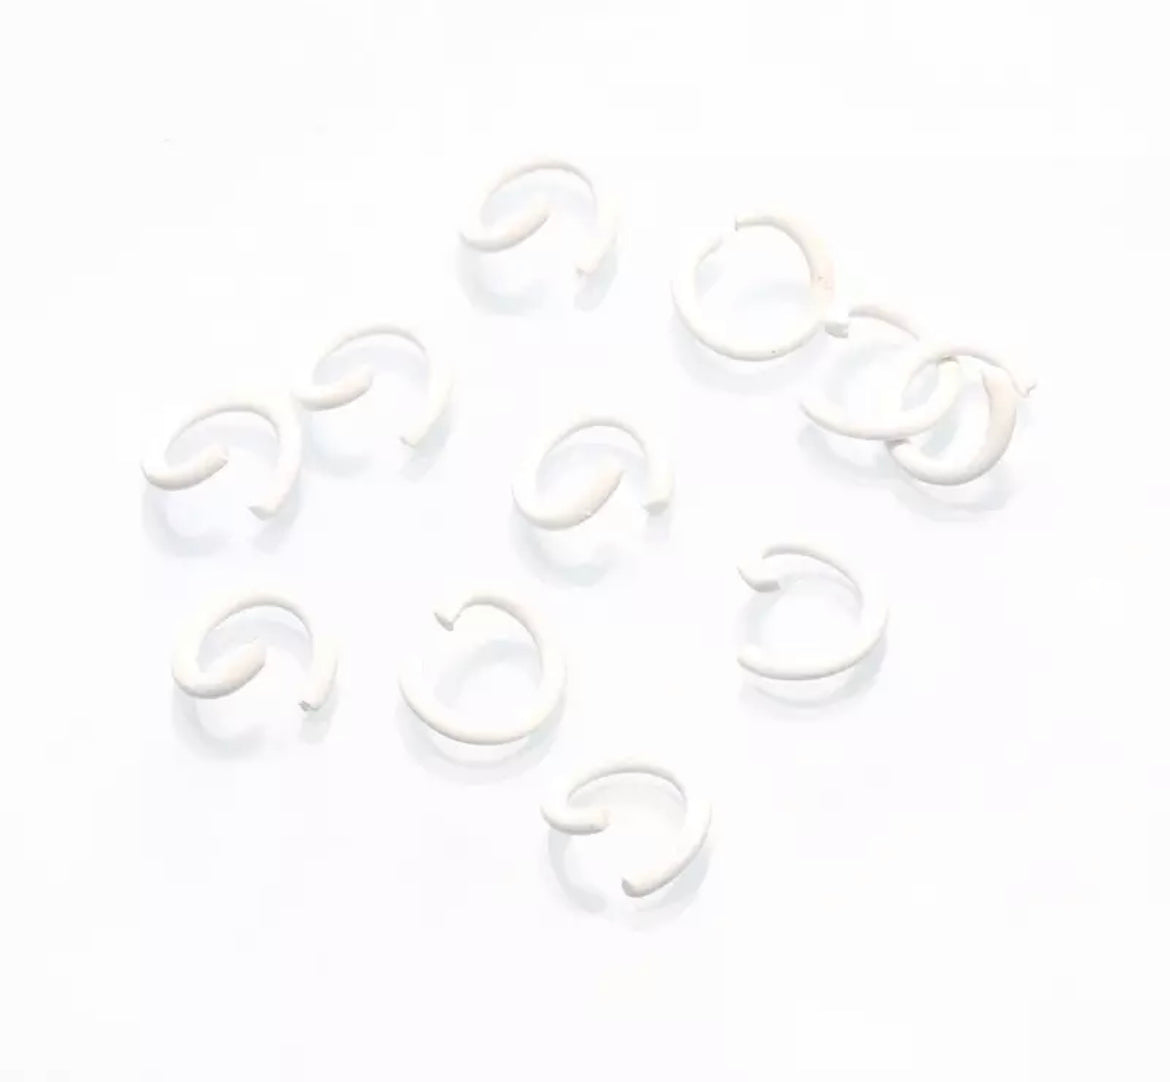 8mm coloured Jump rings - White x 50 pieces